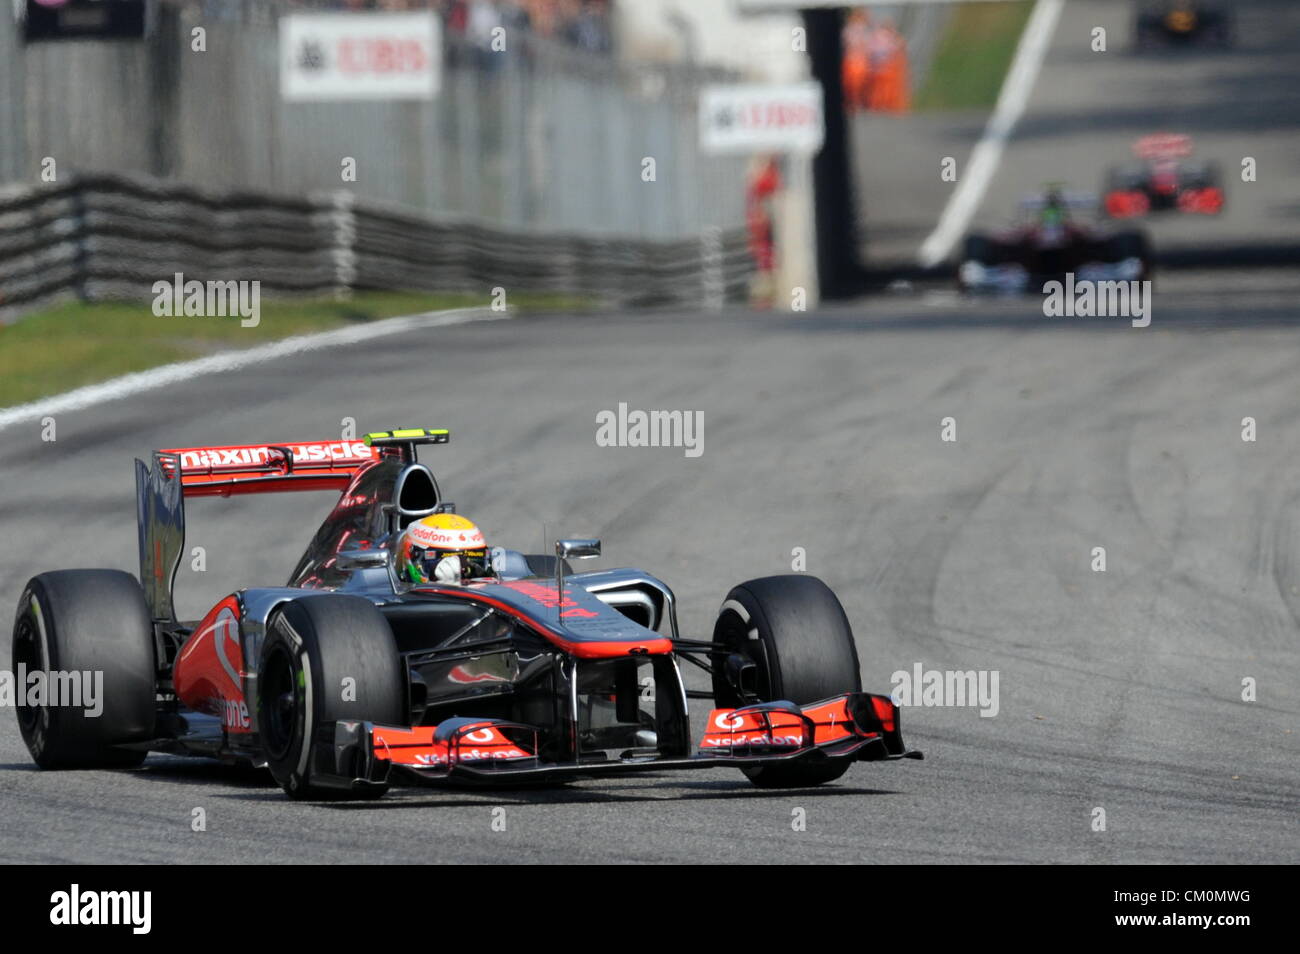 09.09.2012. Monza, Italy. Lewis Hamilton of McLaren in action during the GP of Italy 2012. Hamilton won the F1 of Italy. Stock Photo